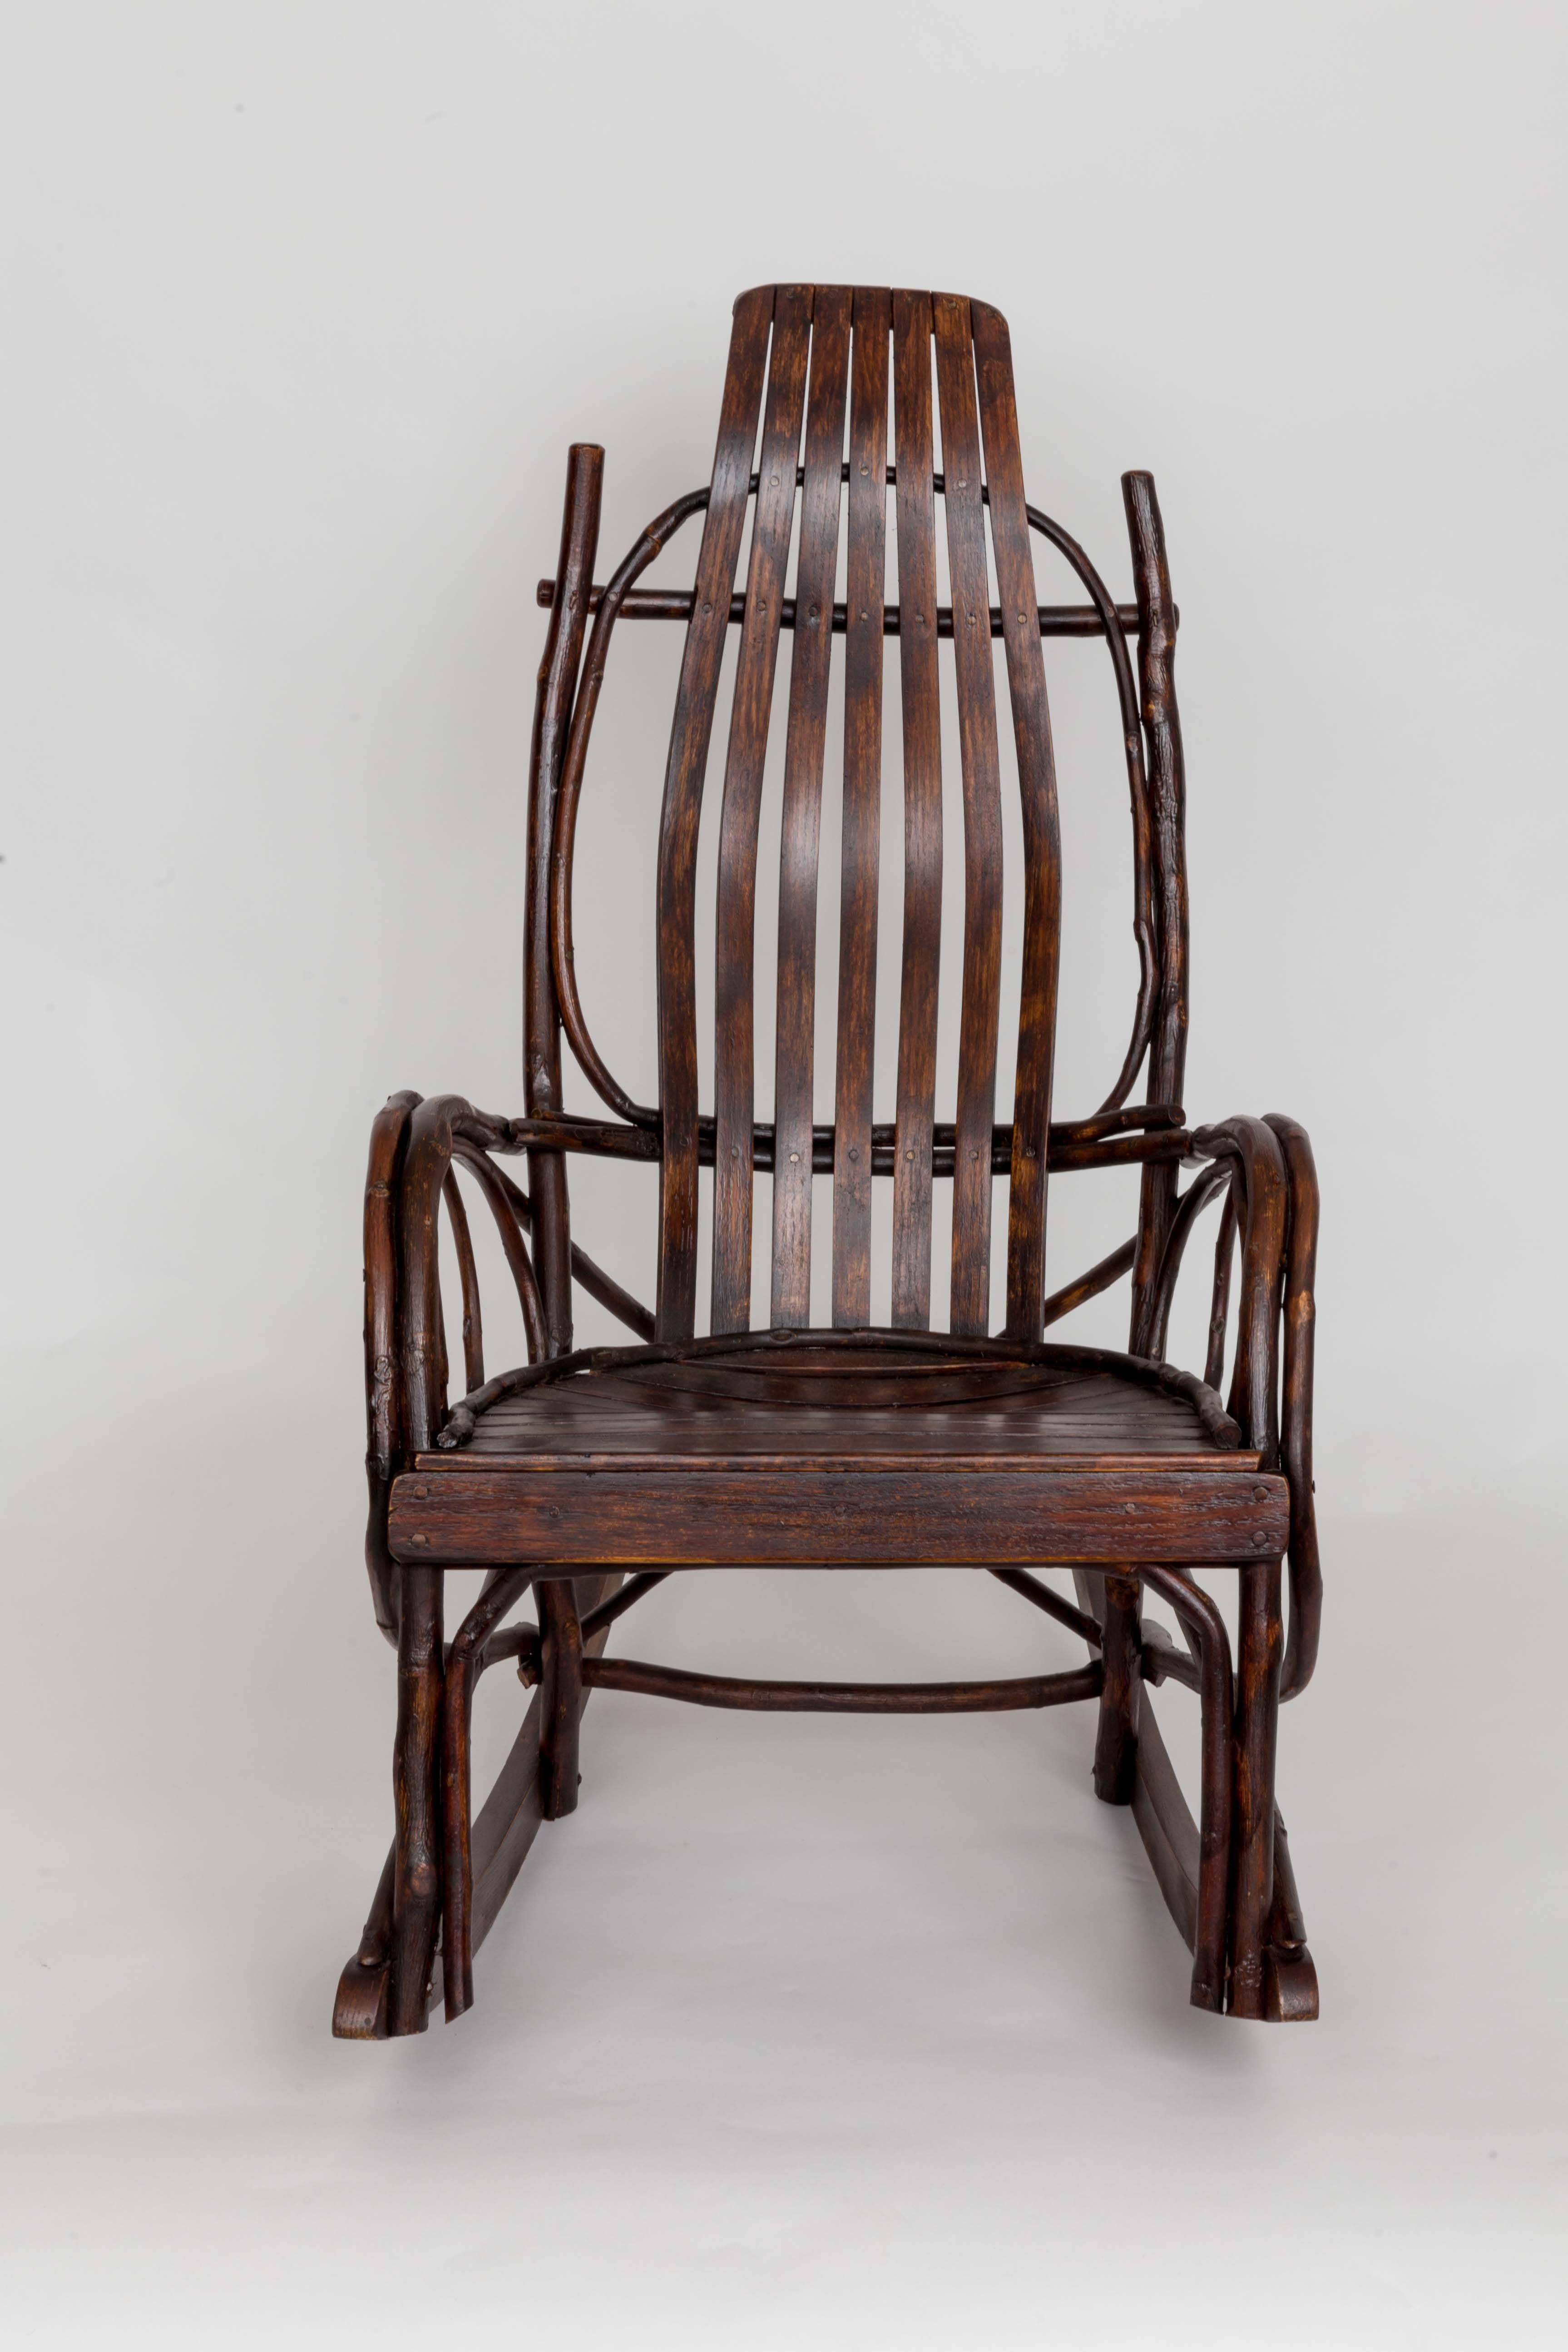 Early 20th-Century Adirondack Childs Rocker For Sale 3